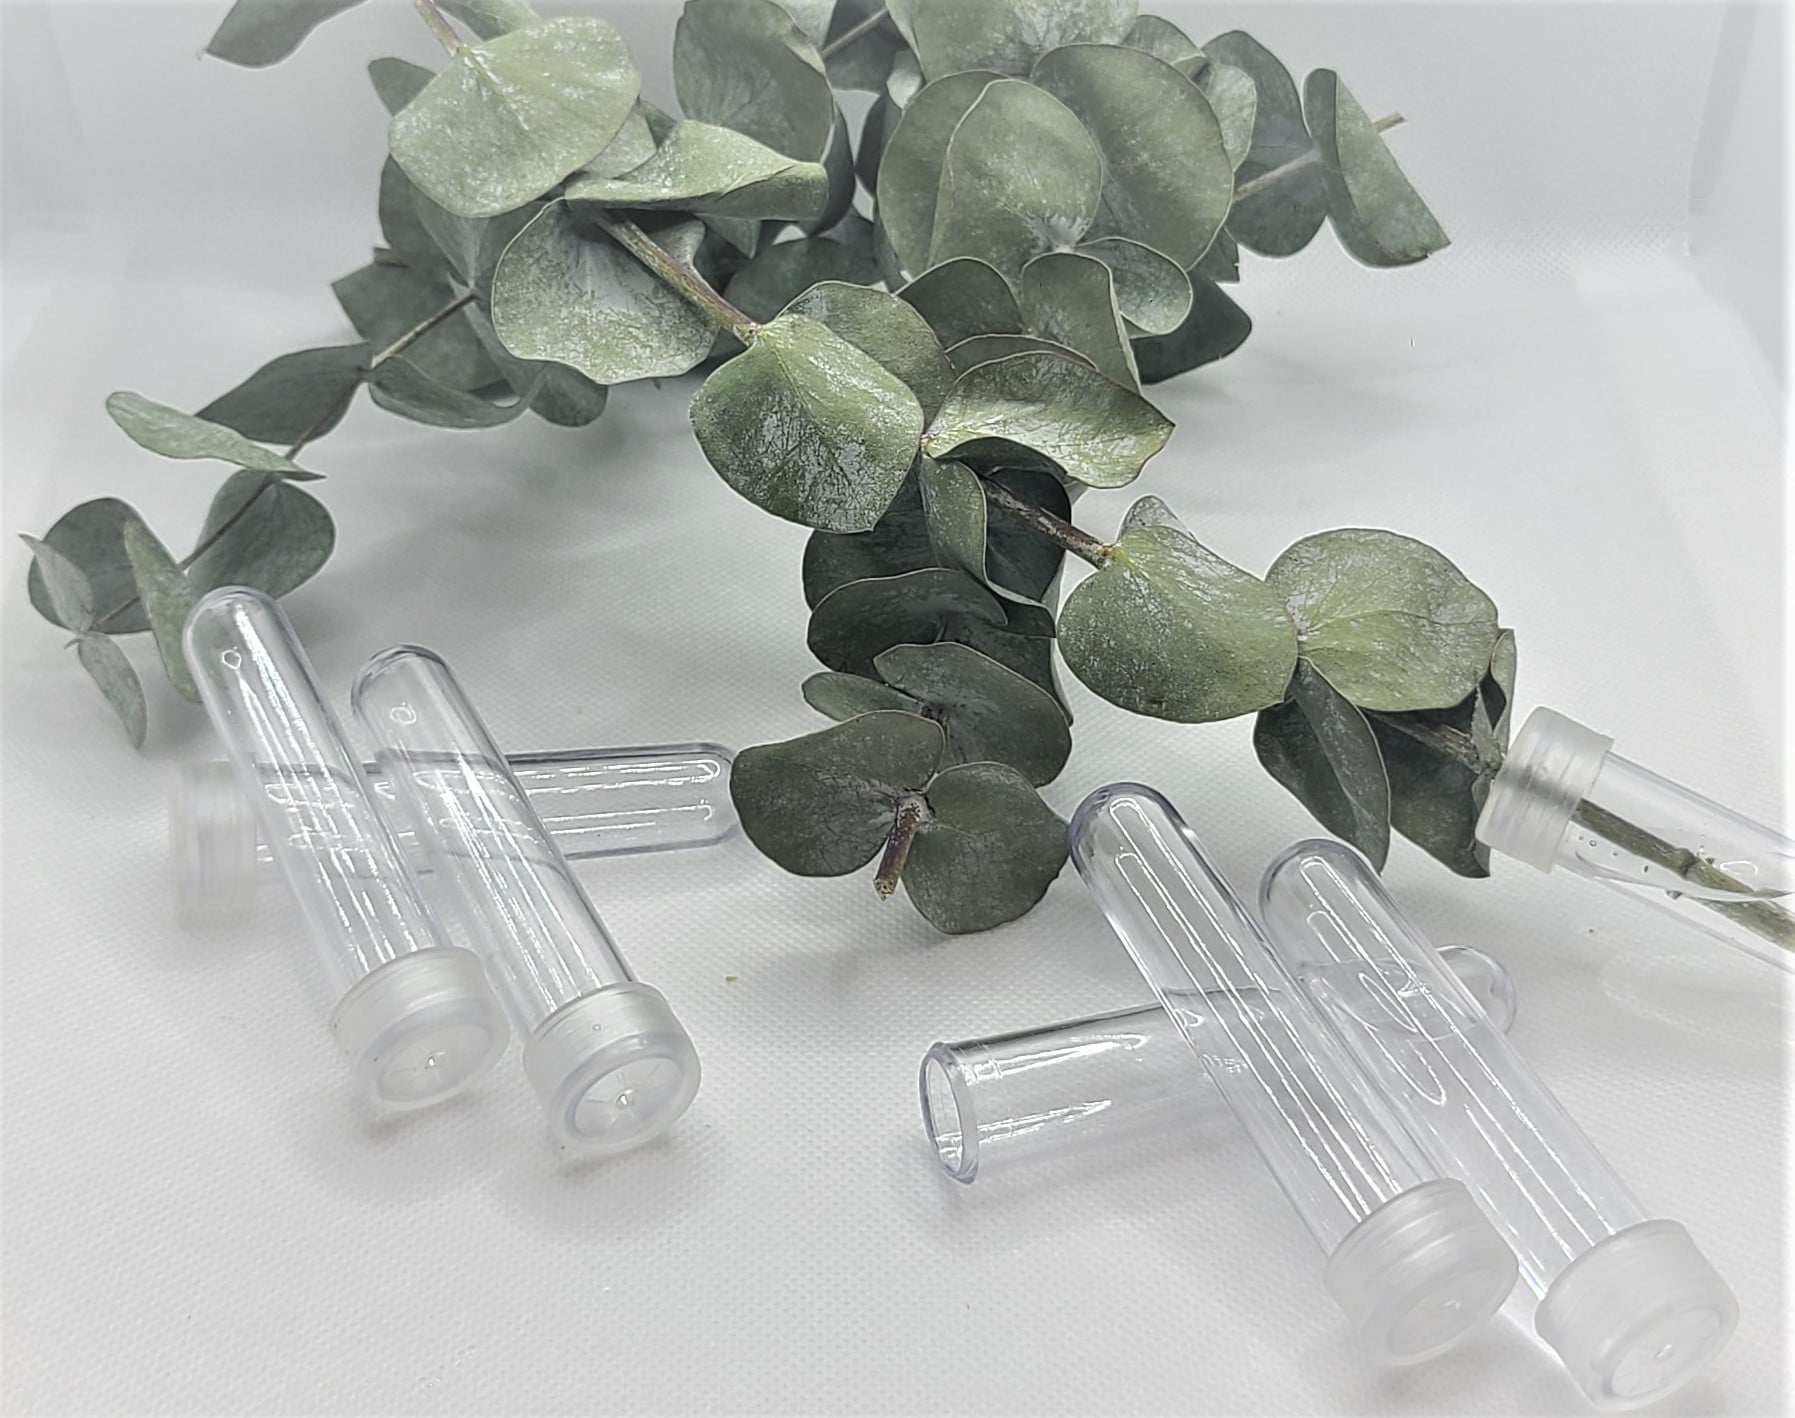 Floral Water Tubes,Vials for Flower Arrangements. Clear - 3 (1/2 Opening)  - Standard 22/Pack - w/Caps 